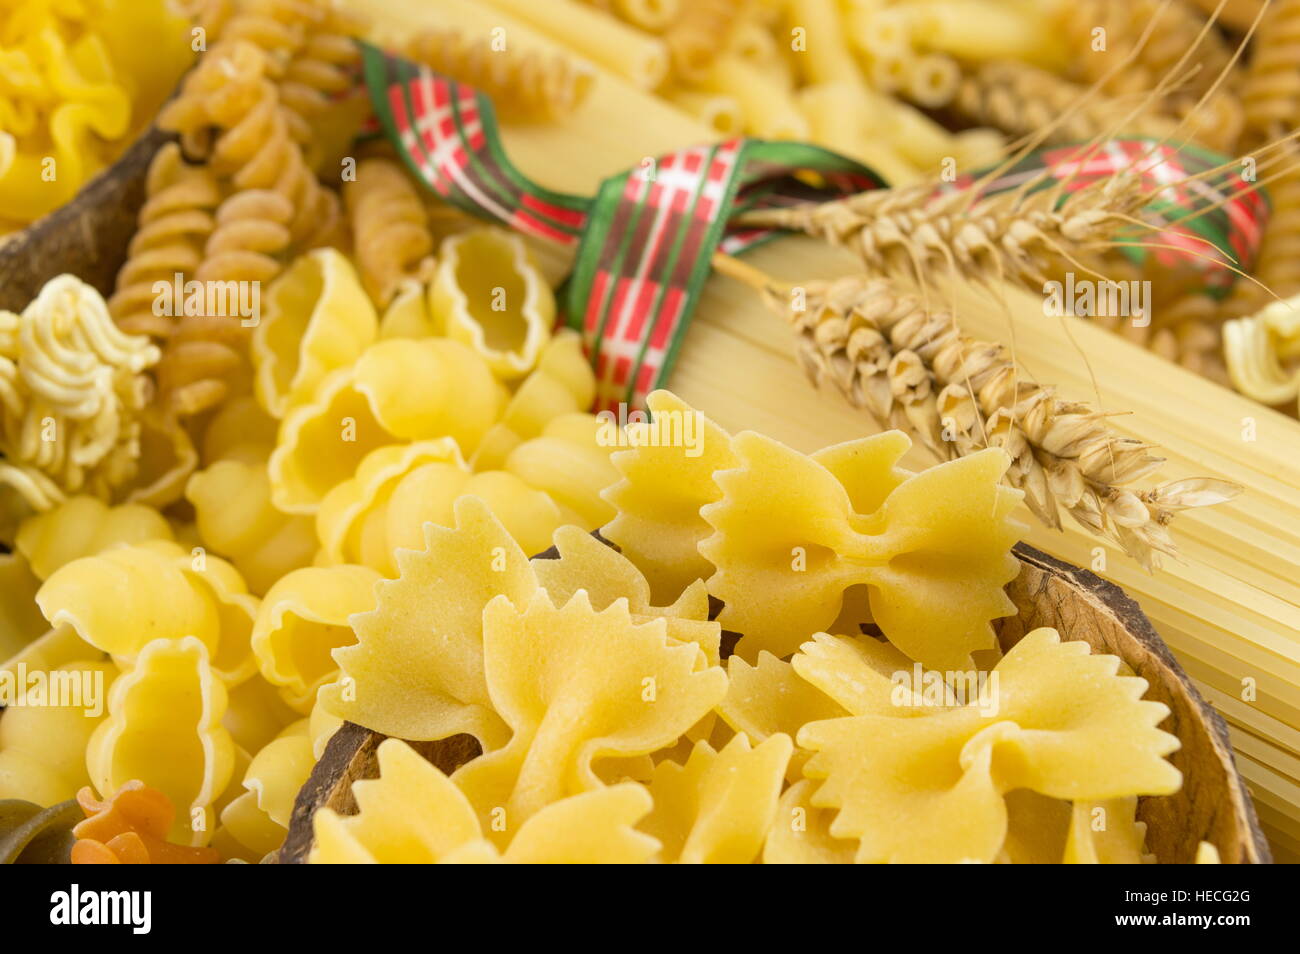 different types of uncooked pasta on a pile Stock Photo